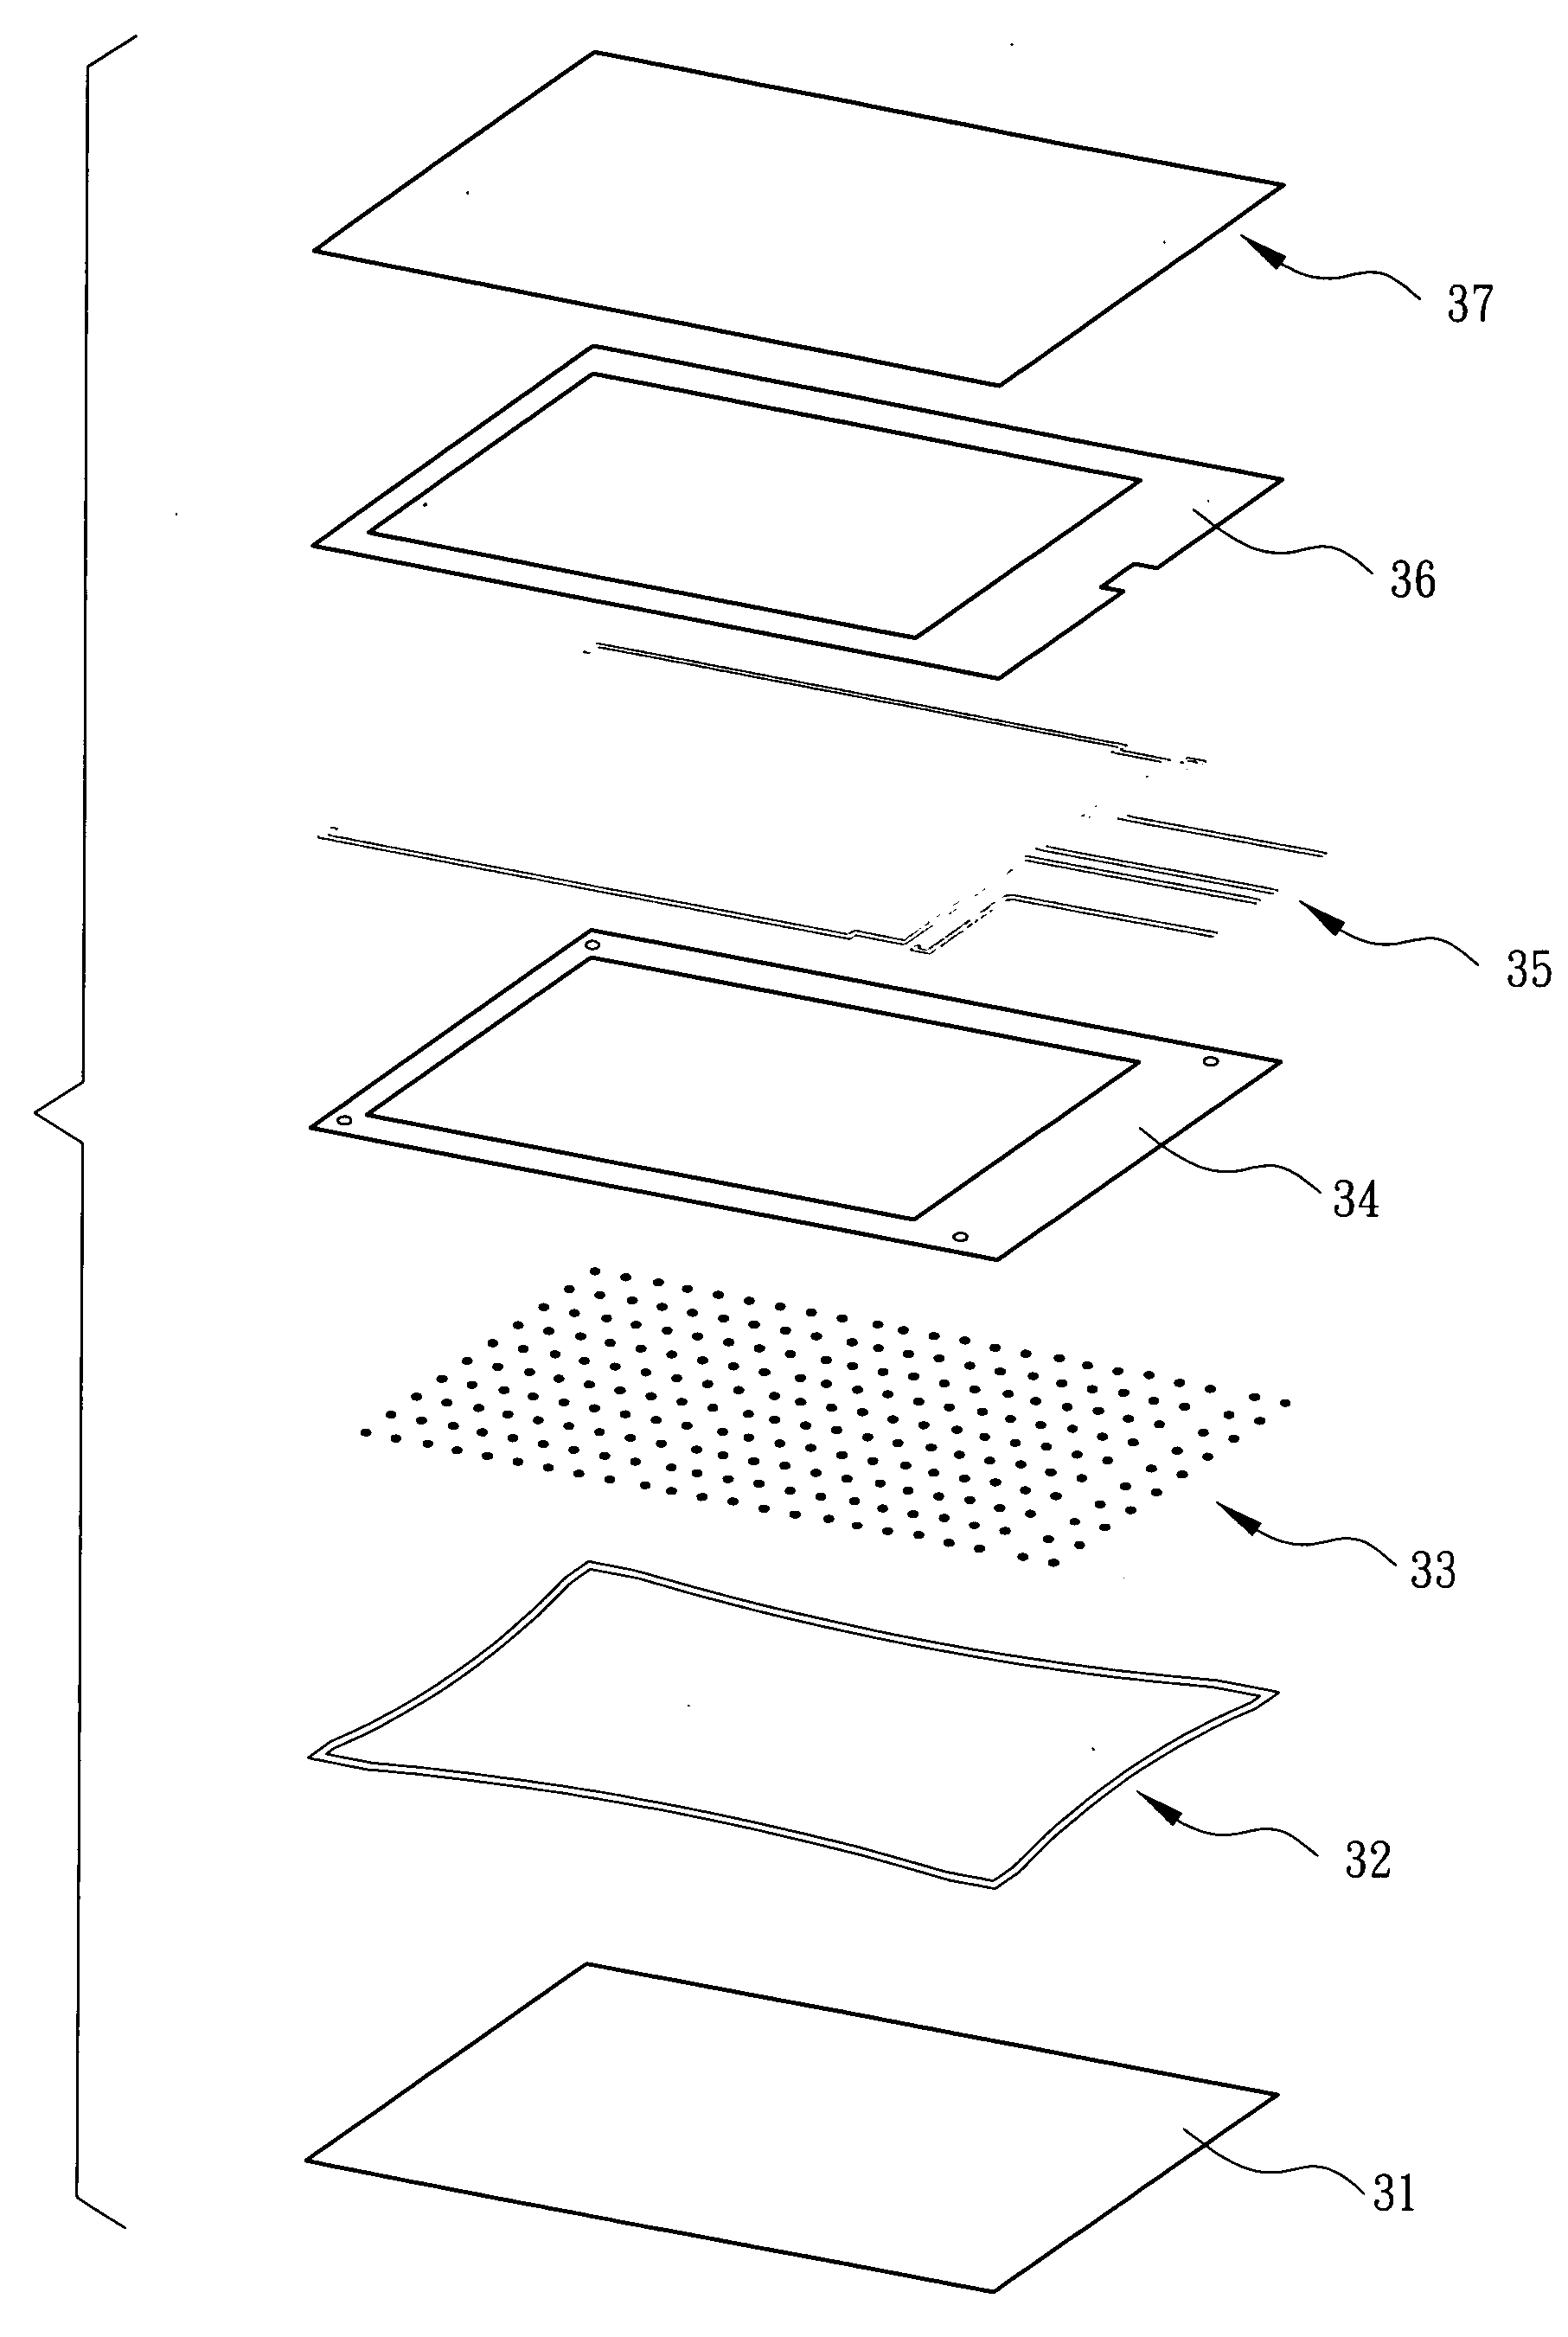 Electrode pattern for touch panels